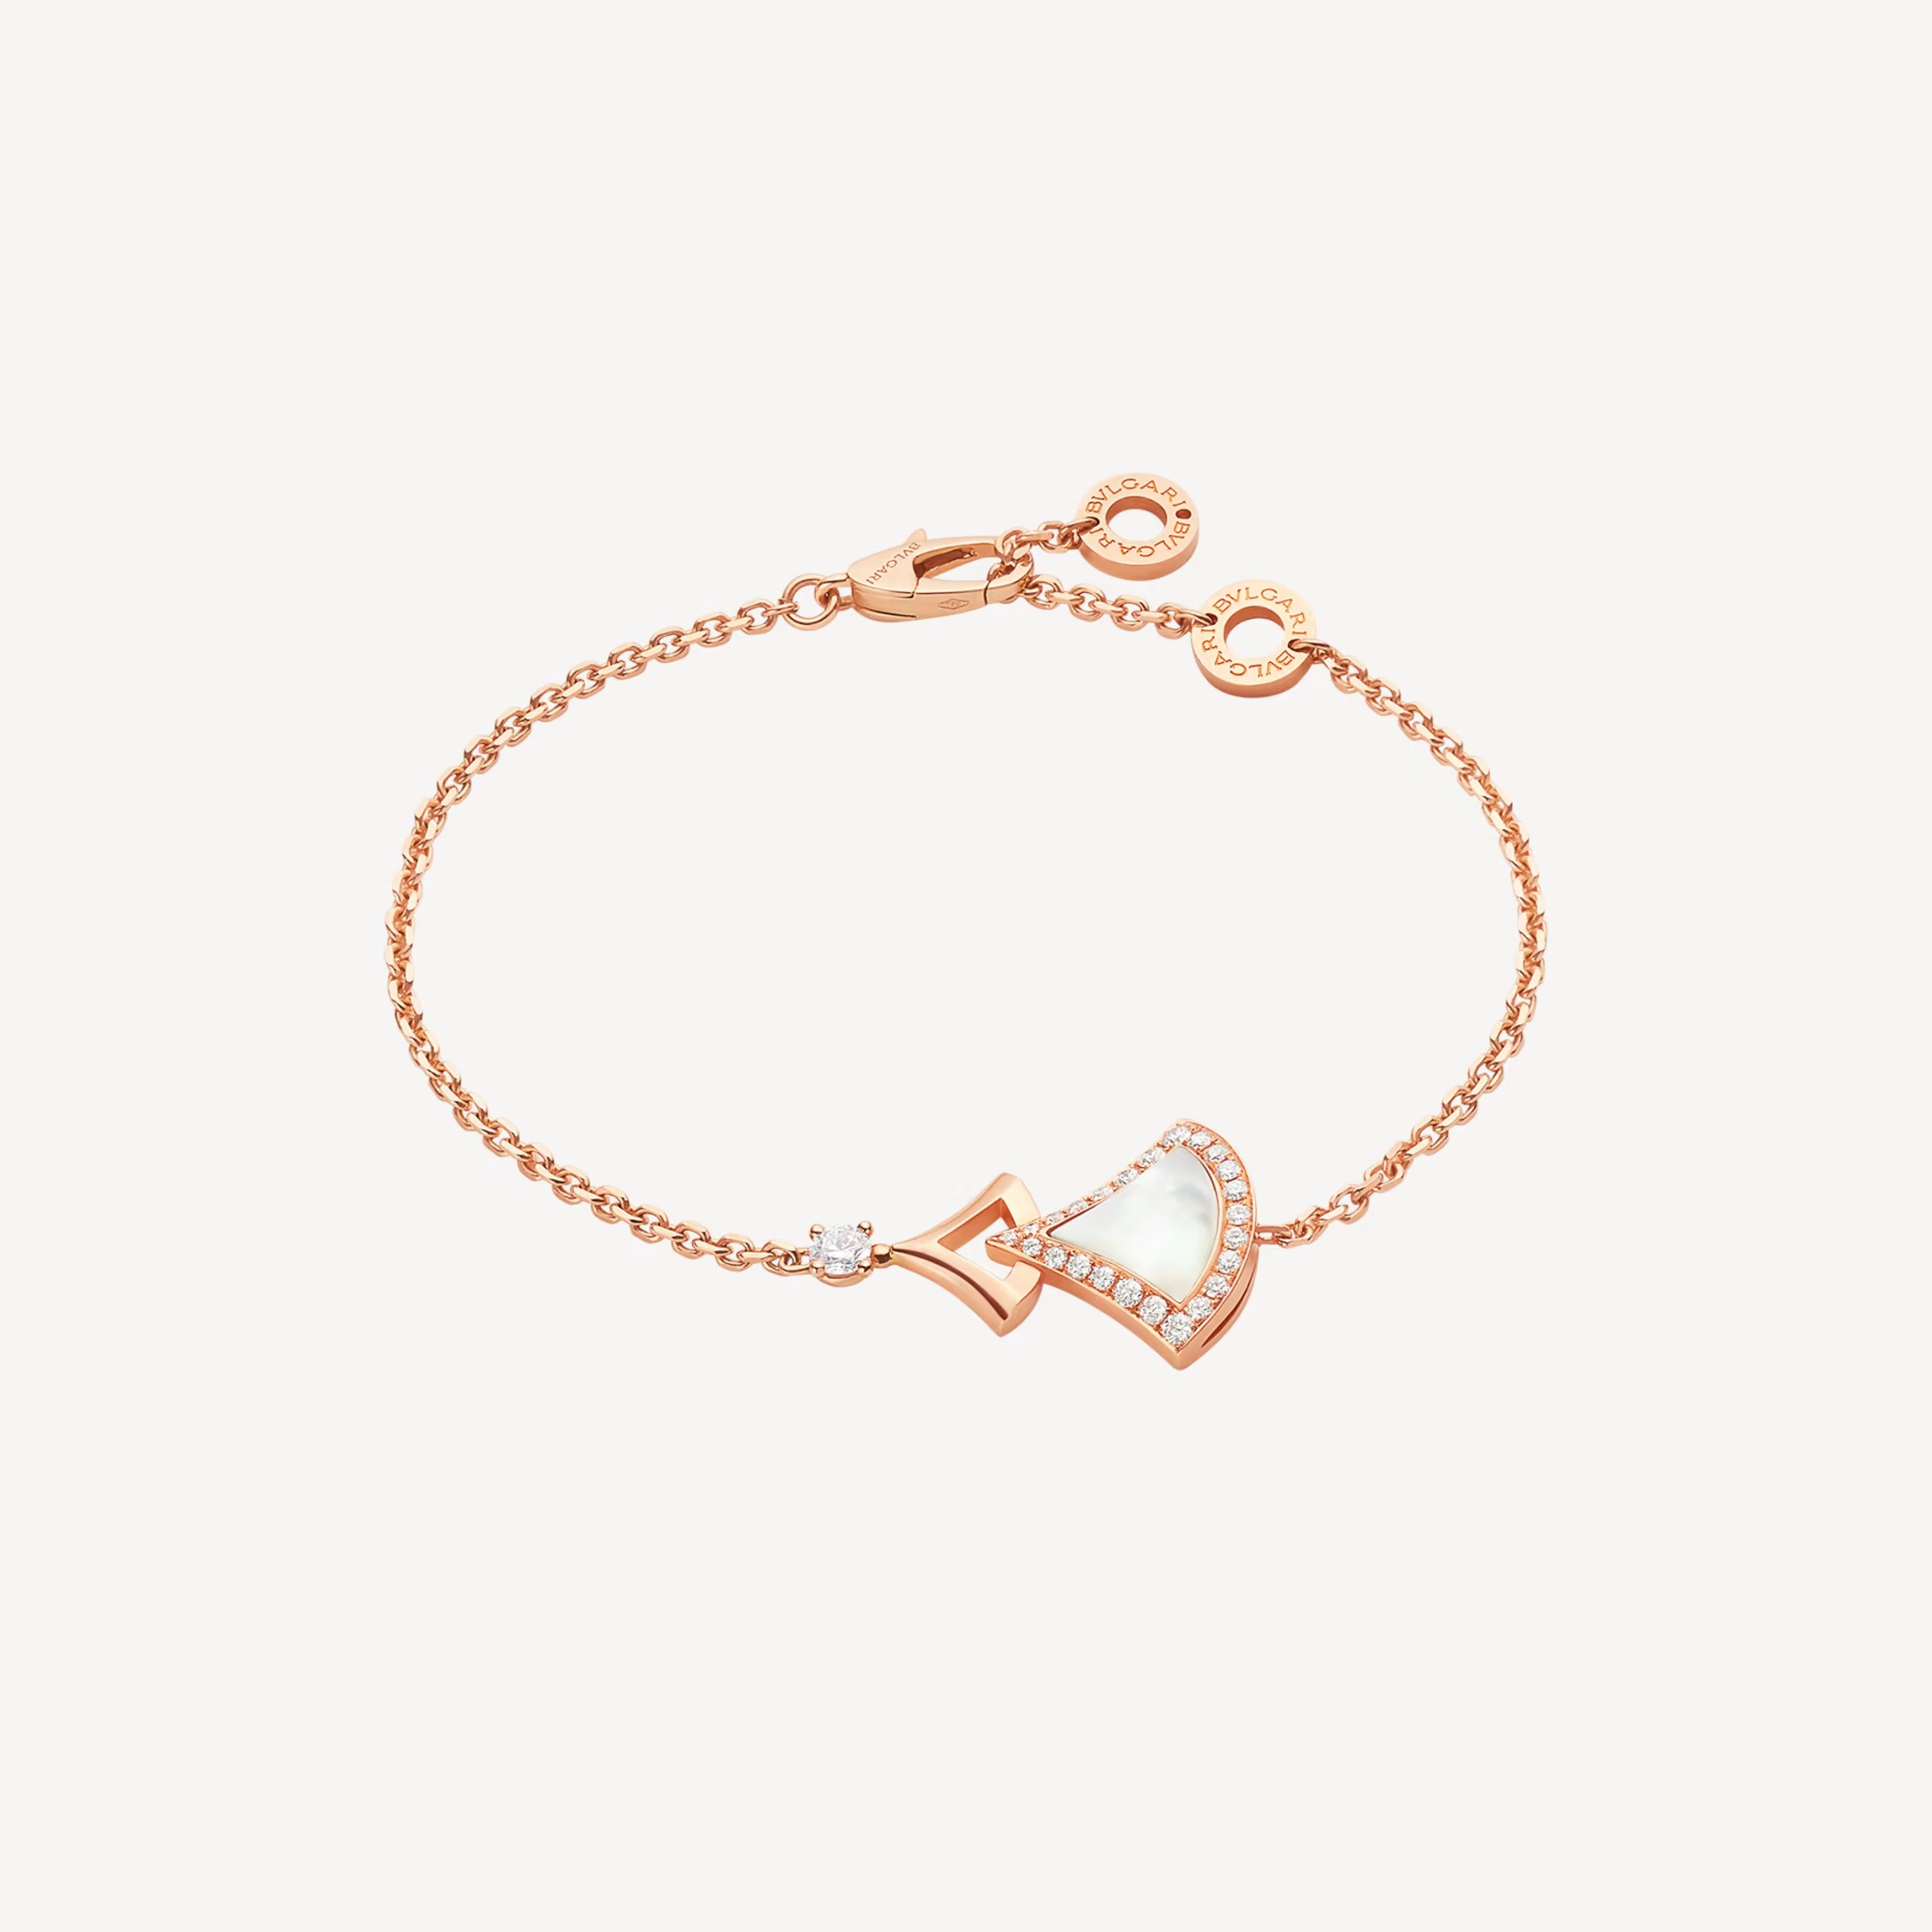 Bvlgari Diva's Dream Bracelet Rose Gold with Mother-of-pearl and